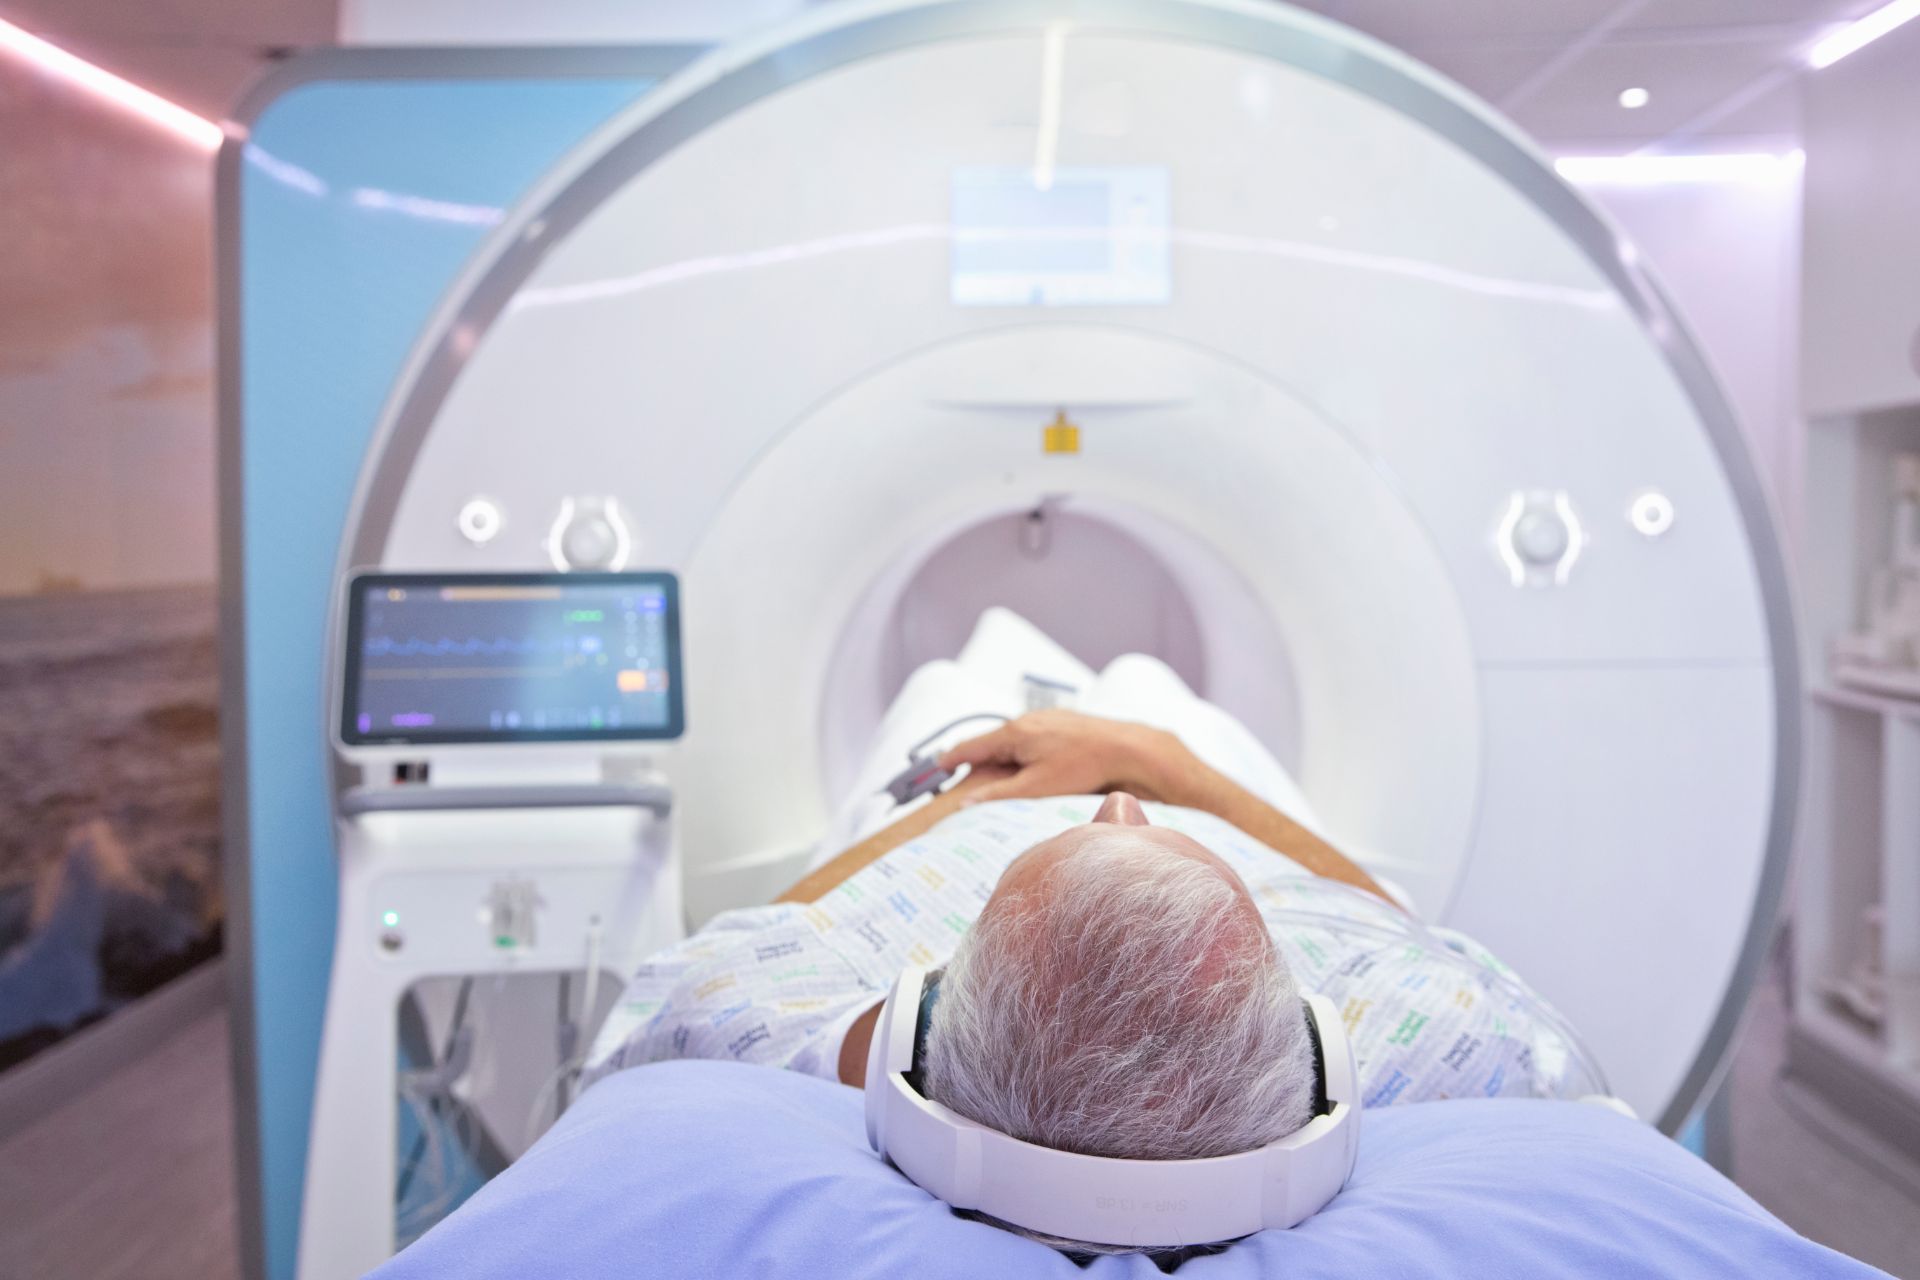 How To Prepare And What To Expect During An MRI Scan